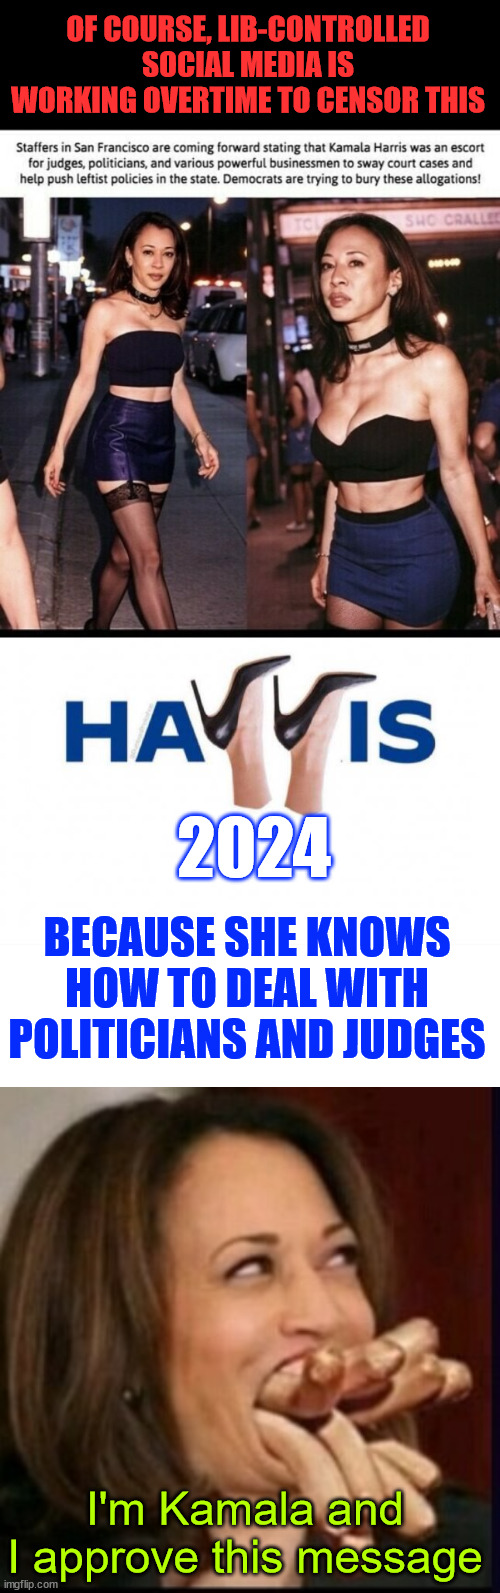 Escort Harris... Hands and mouth on political experience | OF COURSE, LIB-CONTROLLED SOCIAL MEDIA IS WORKING OVERTIME TO CENSOR THIS; 2024; BECAUSE SHE KNOWS HOW TO DEAL WITH POLITICIANS AND JUDGES; I'm Kamala and I approve this message | image tagged in escort,kamala harris,liberal medai and dems,want to censor the truth about her past | made w/ Imgflip meme maker